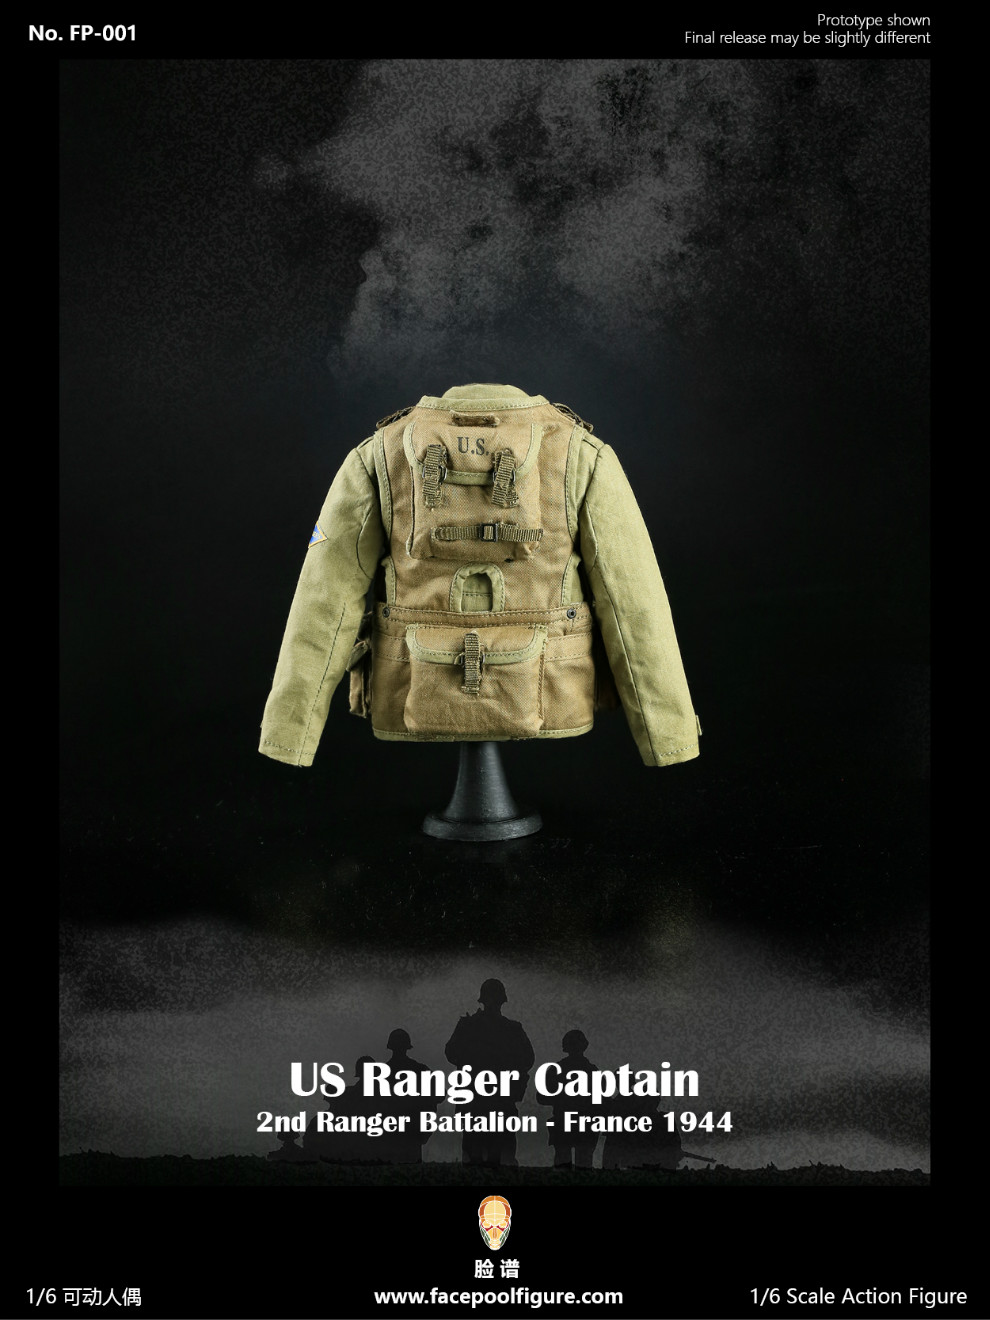 Military - NEW PRODUCT: update notice Facepool: 1/6 WWII US RANGER CAPTAIN World War II US Rangers Captain - Anniversary 23224211